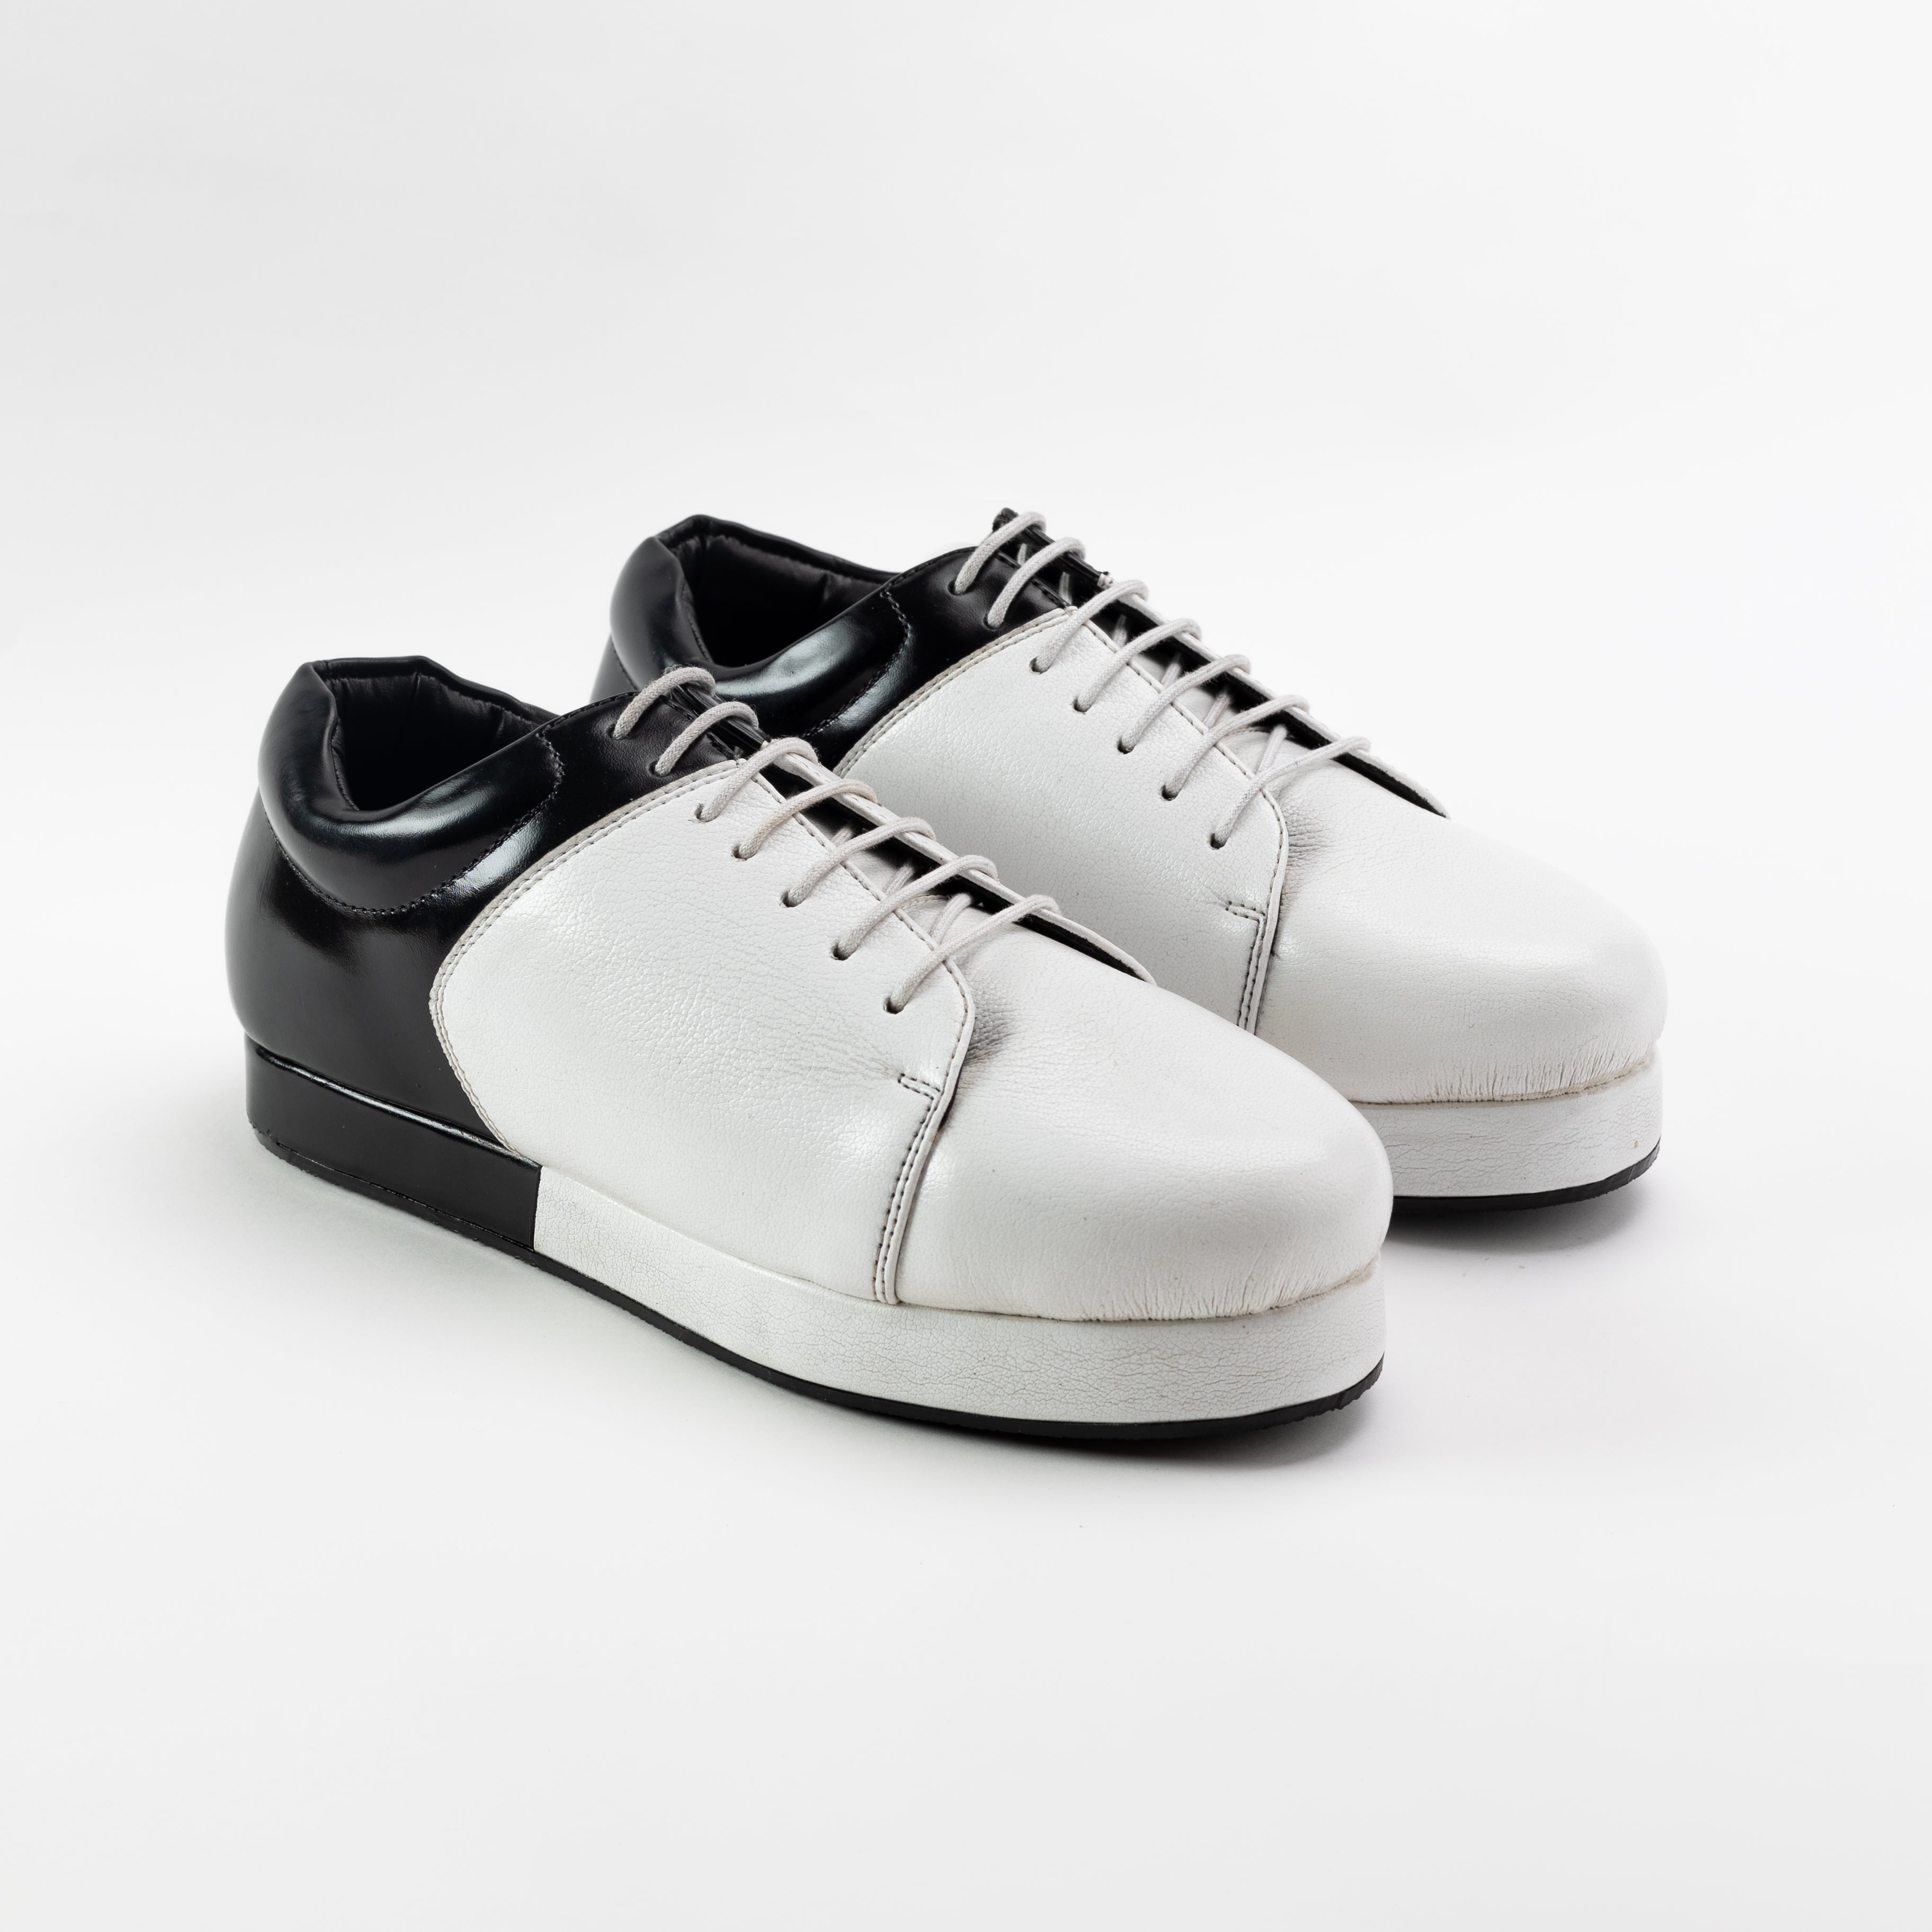 Offbeat Lace Vegan Sneakers - The Double Dare